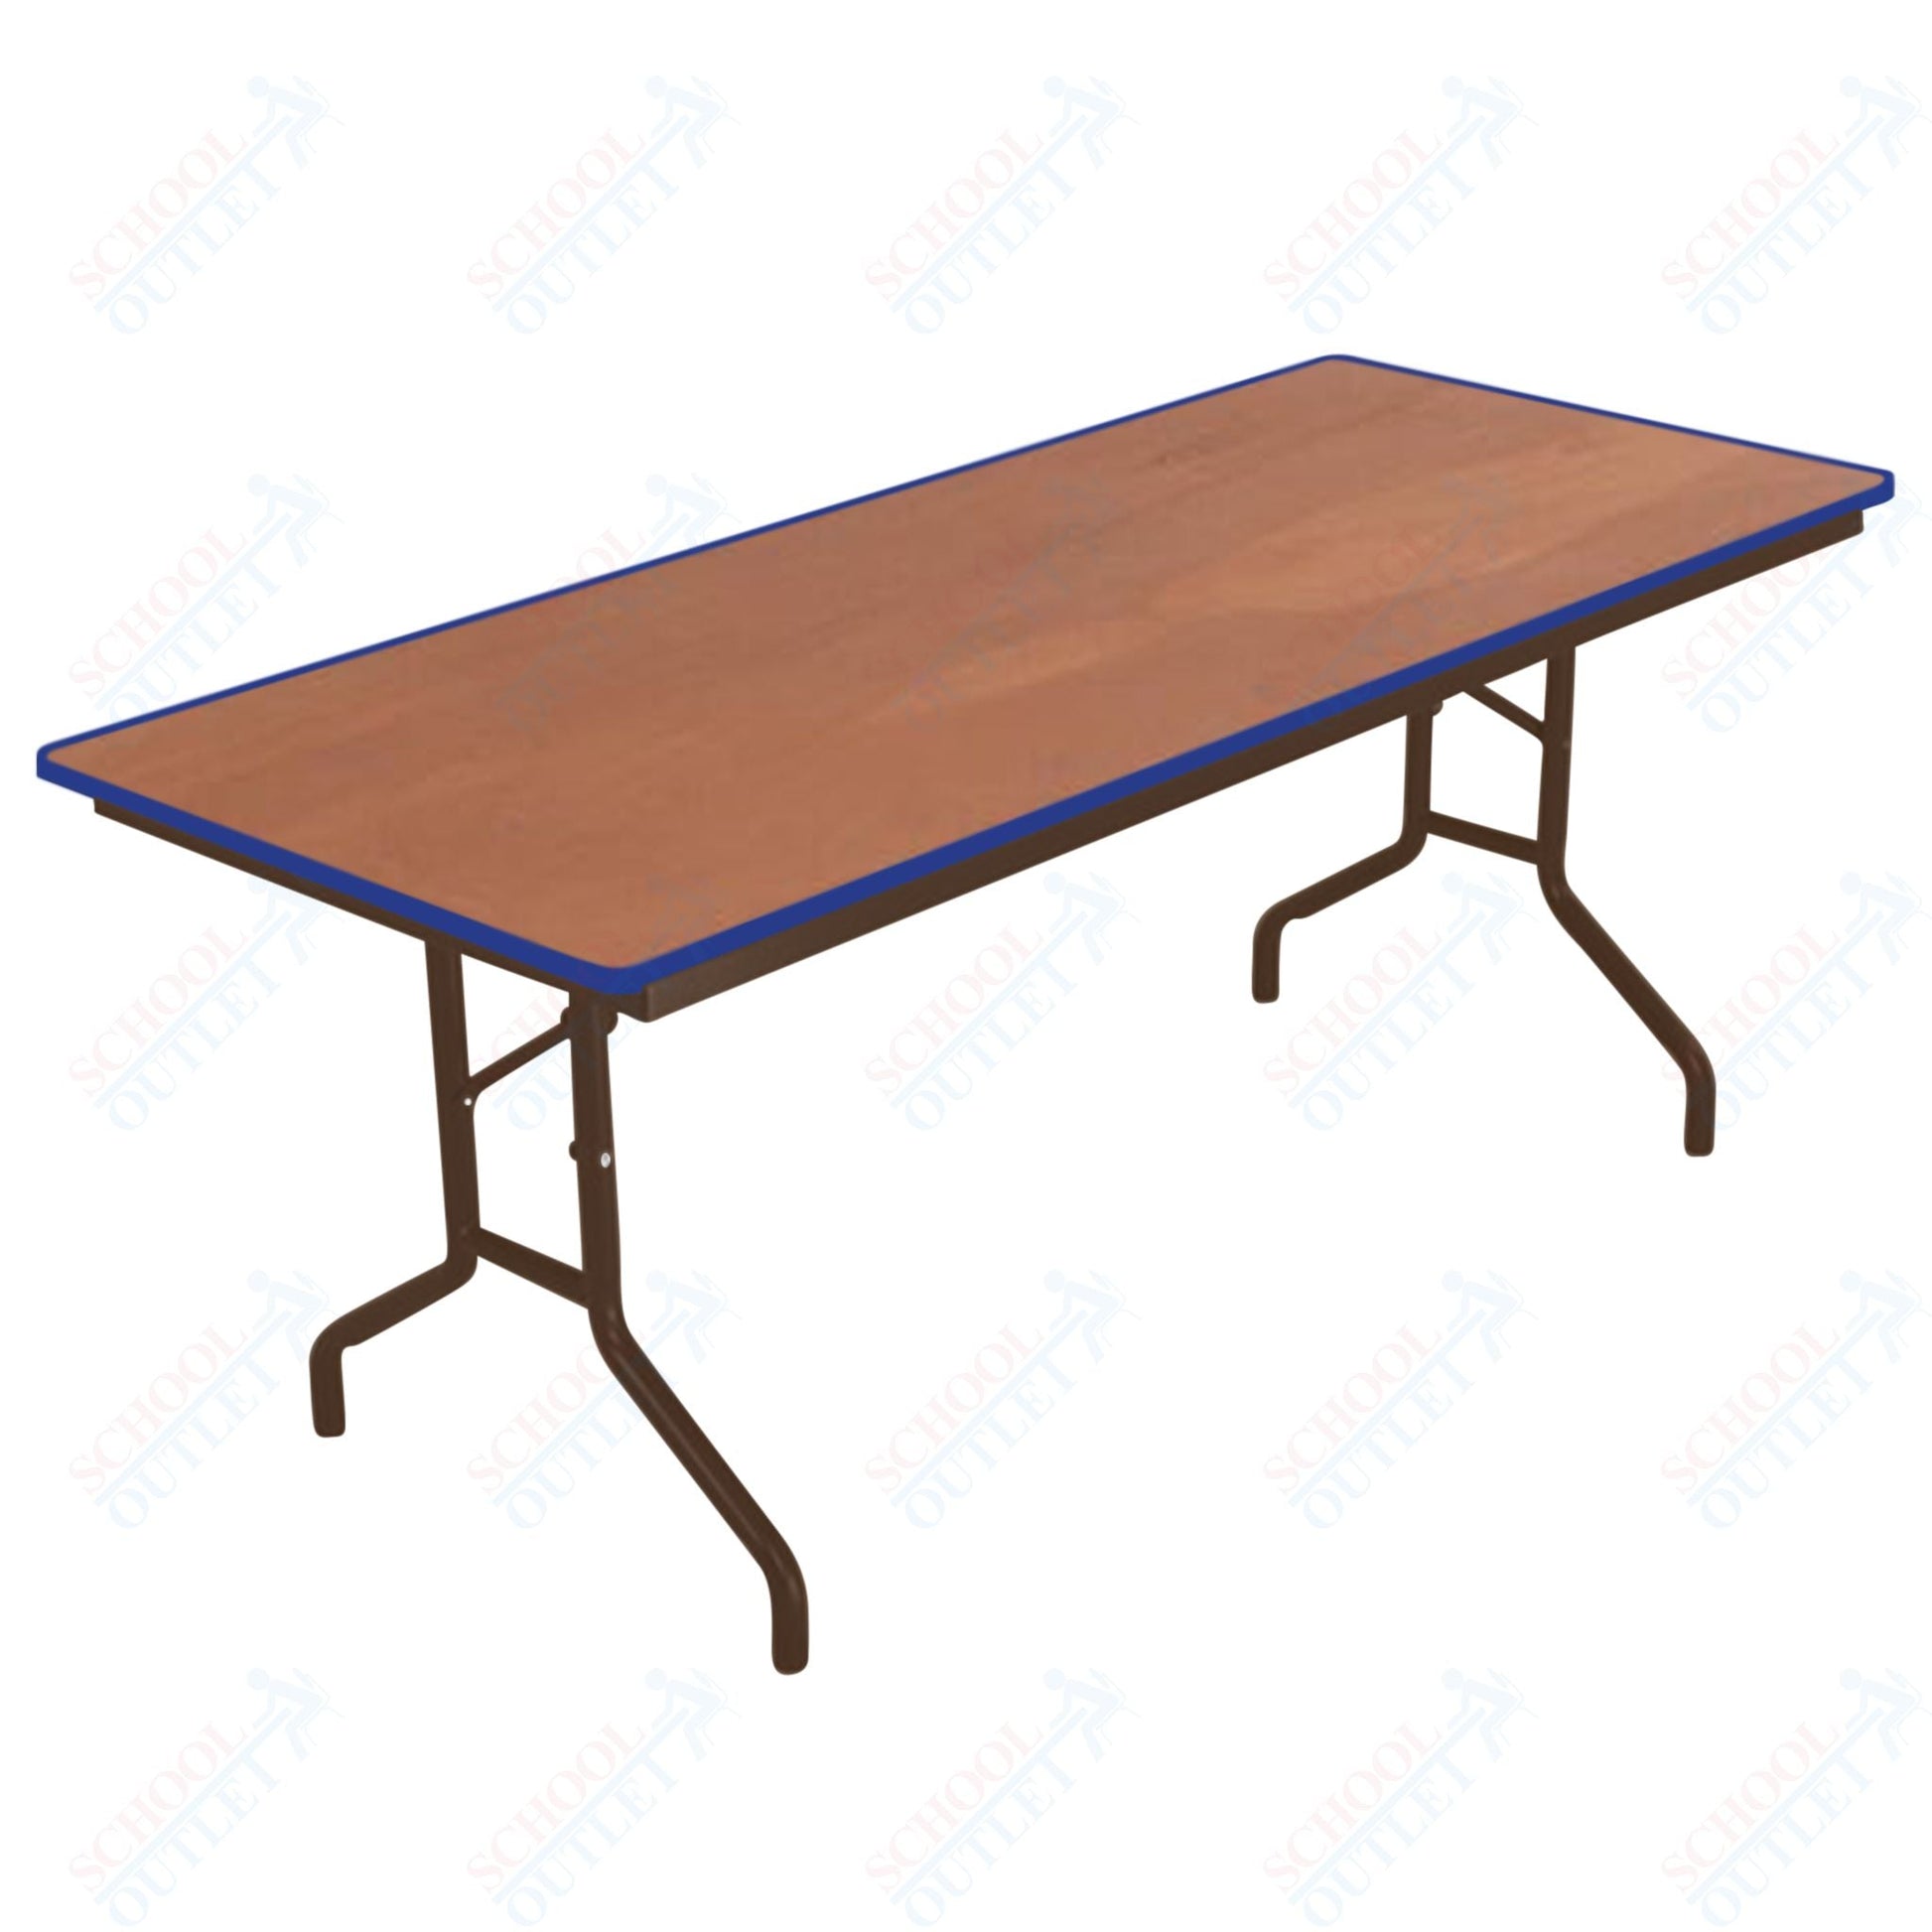 AmTab Folding Table - Plywood Stained and Sealed - Vinyl T - Molding Edge - 18"W x 72"L x 29"H (AmTab AMT - 186PM) - SchoolOutlet